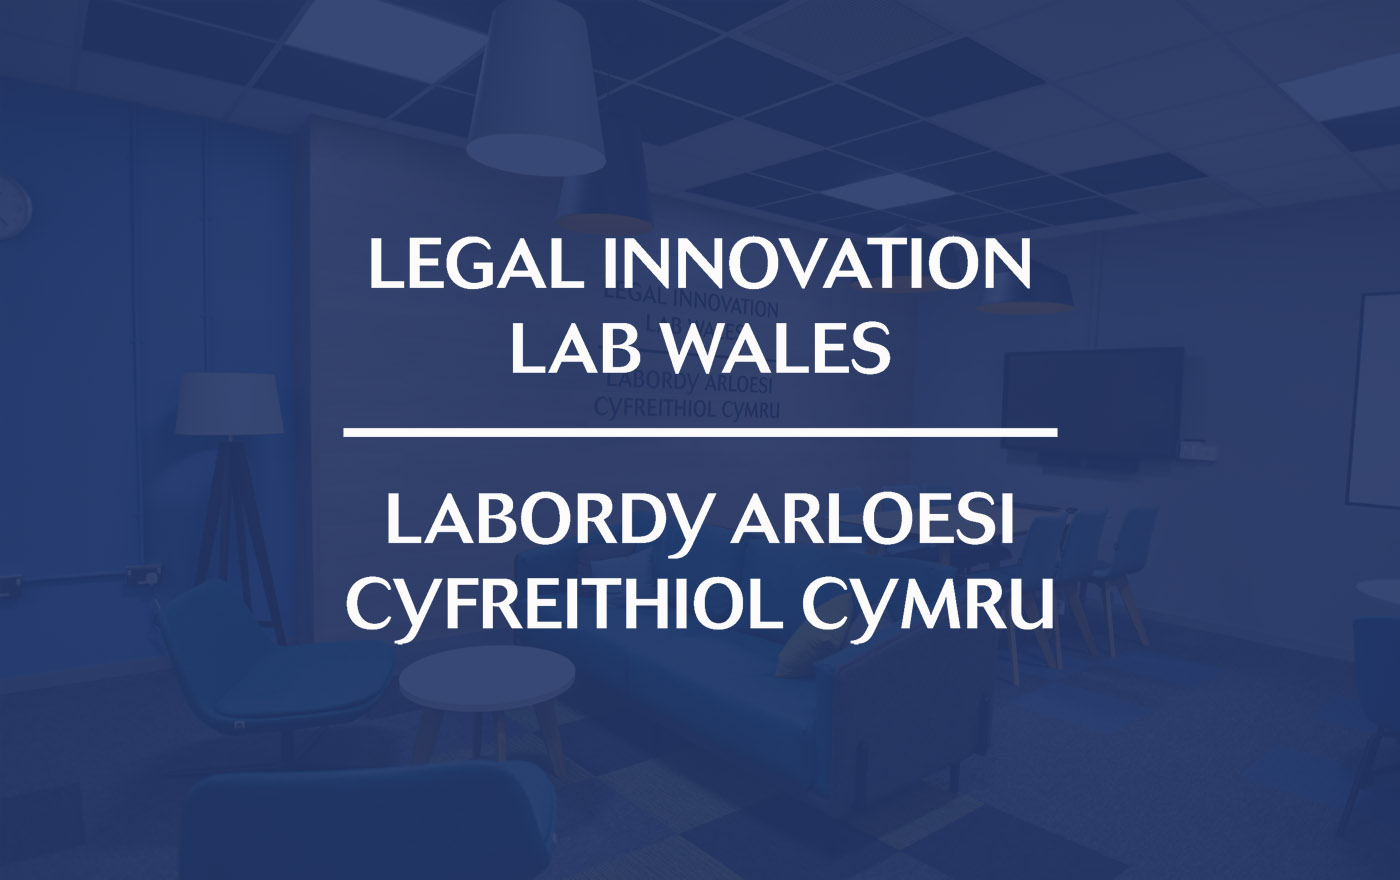 Legal Innovation Lab Wales Awarded Key Grant in Partnership with the SRA, ICO and UWE